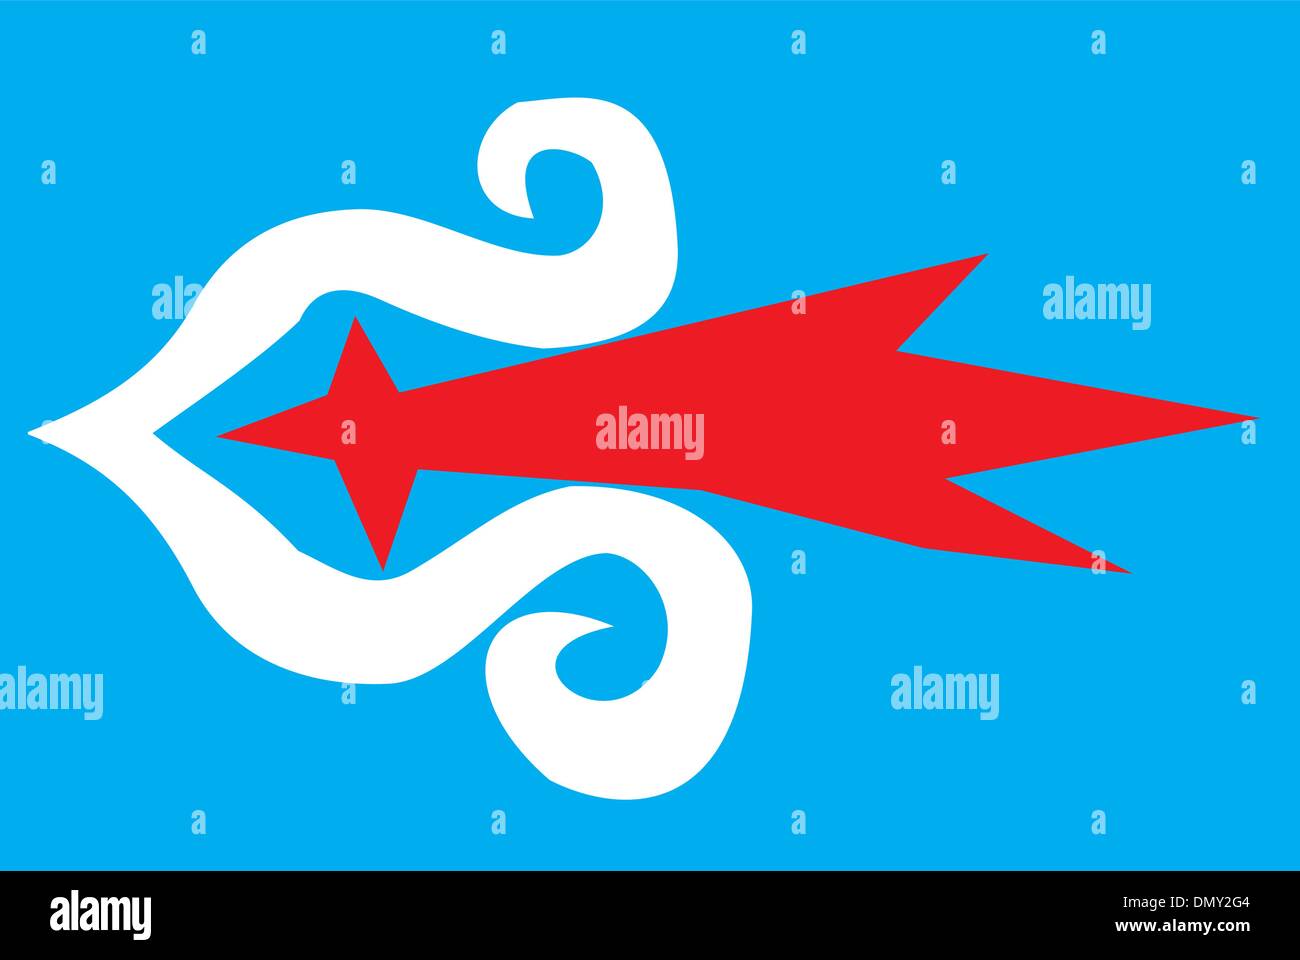 Flag of ainu Stock Vector Images - Alamy